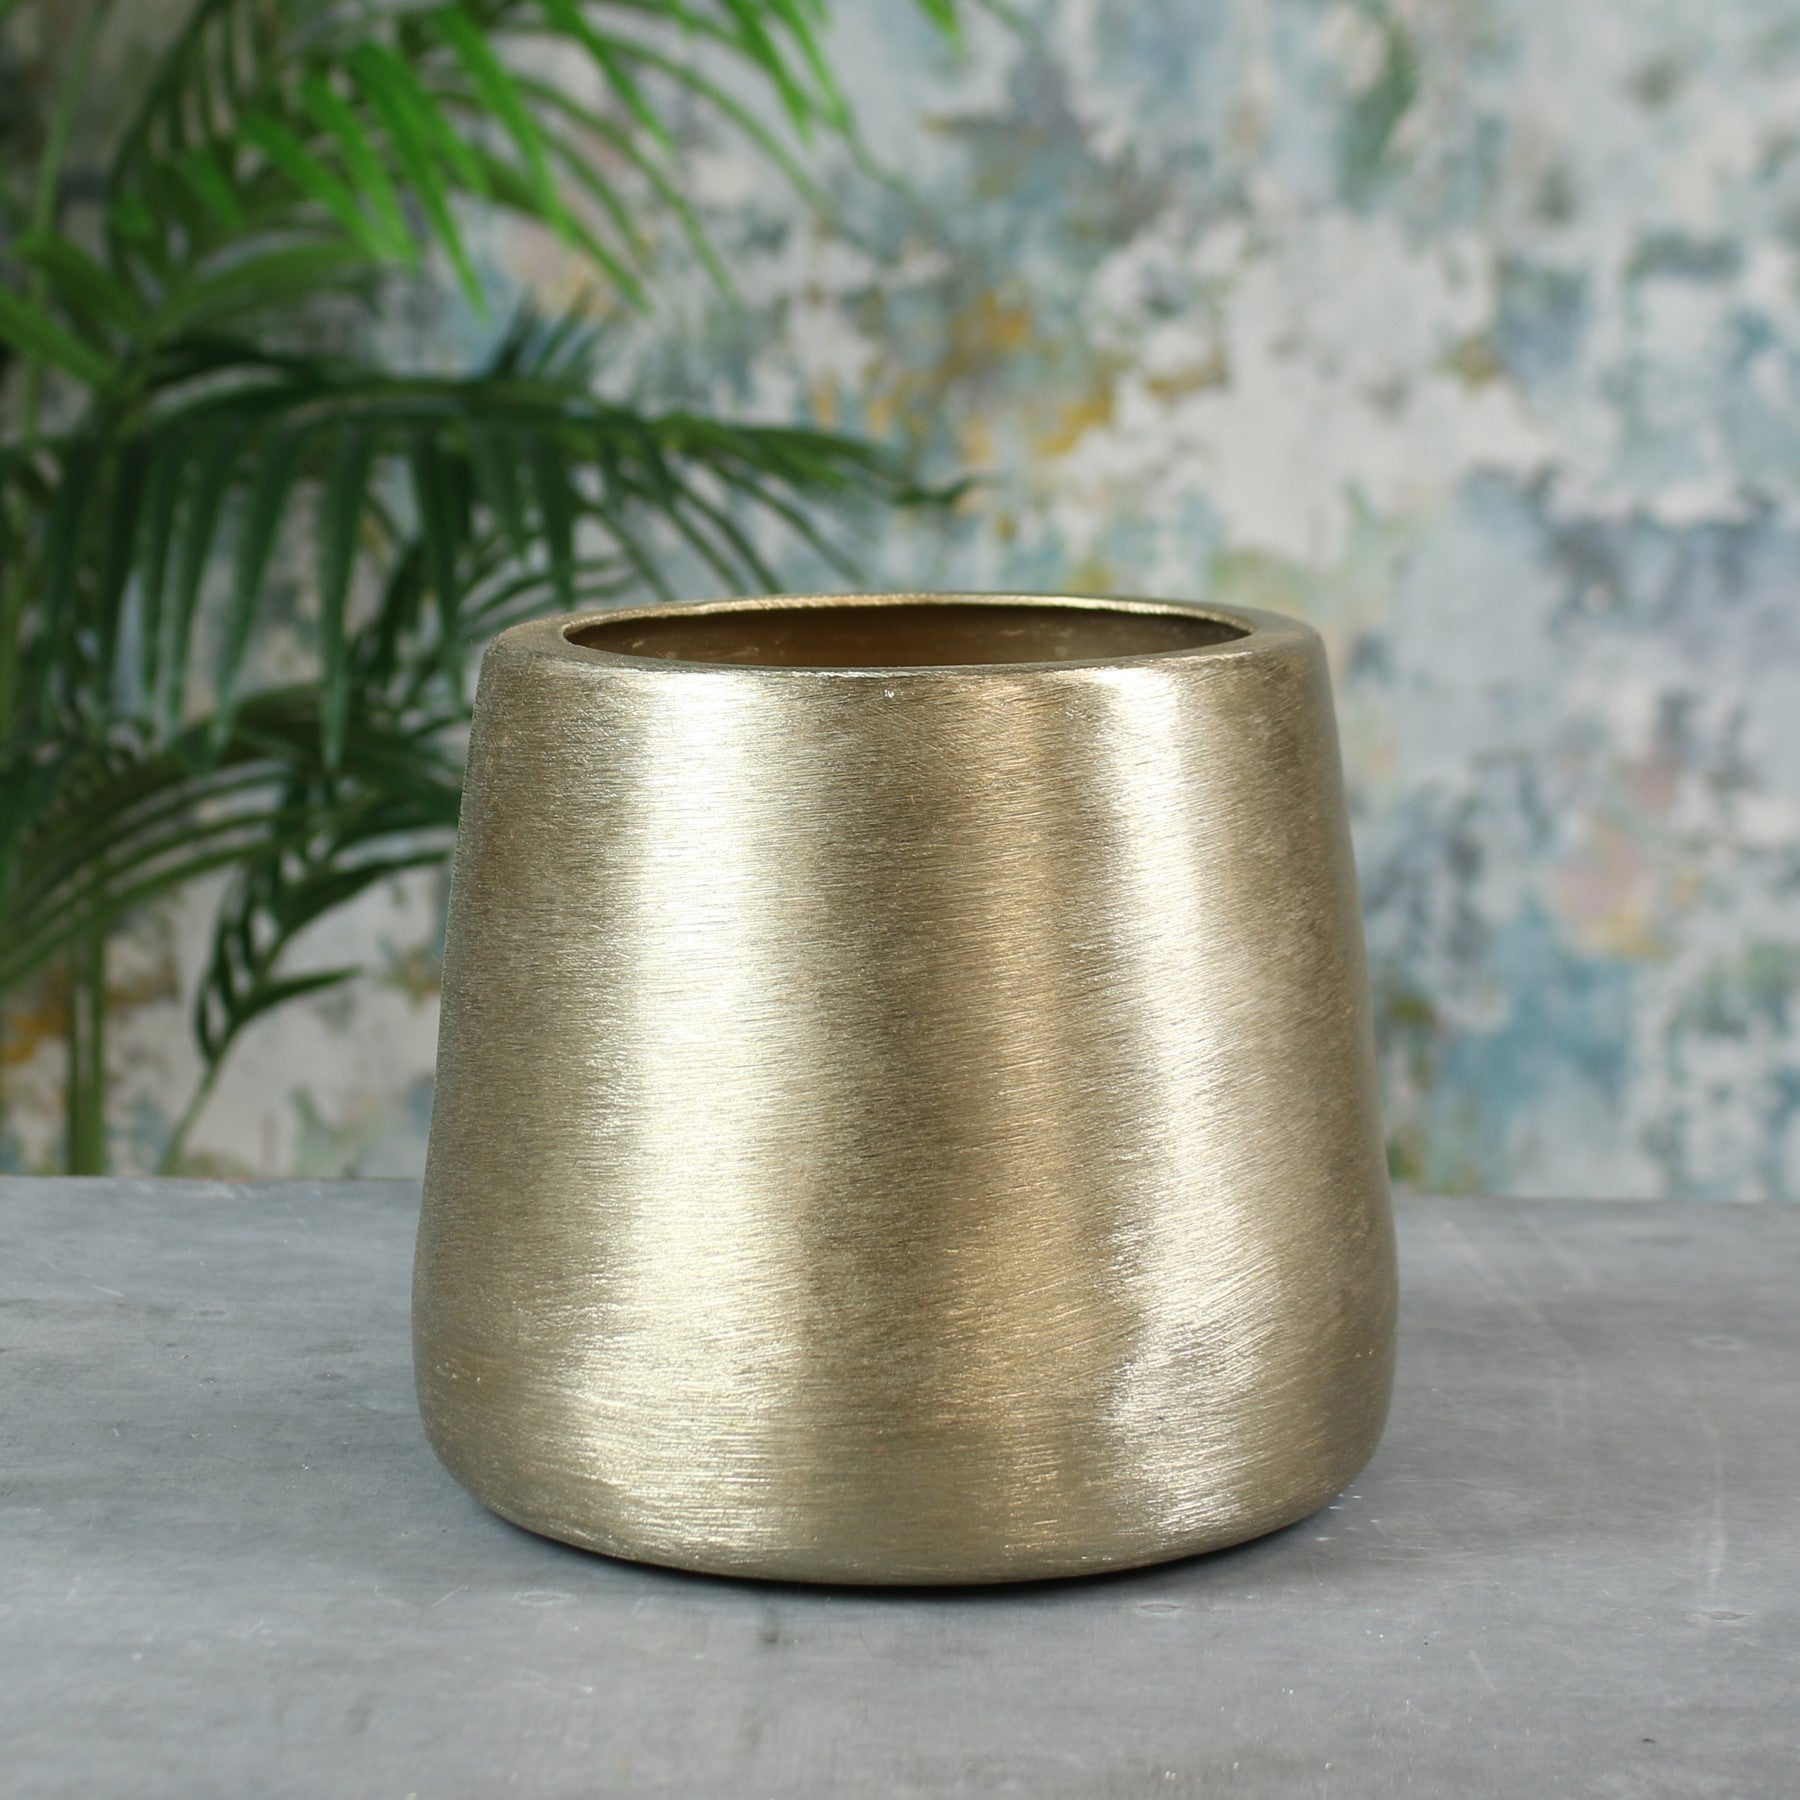 View Greenwich Brushed Gold Planter Small information